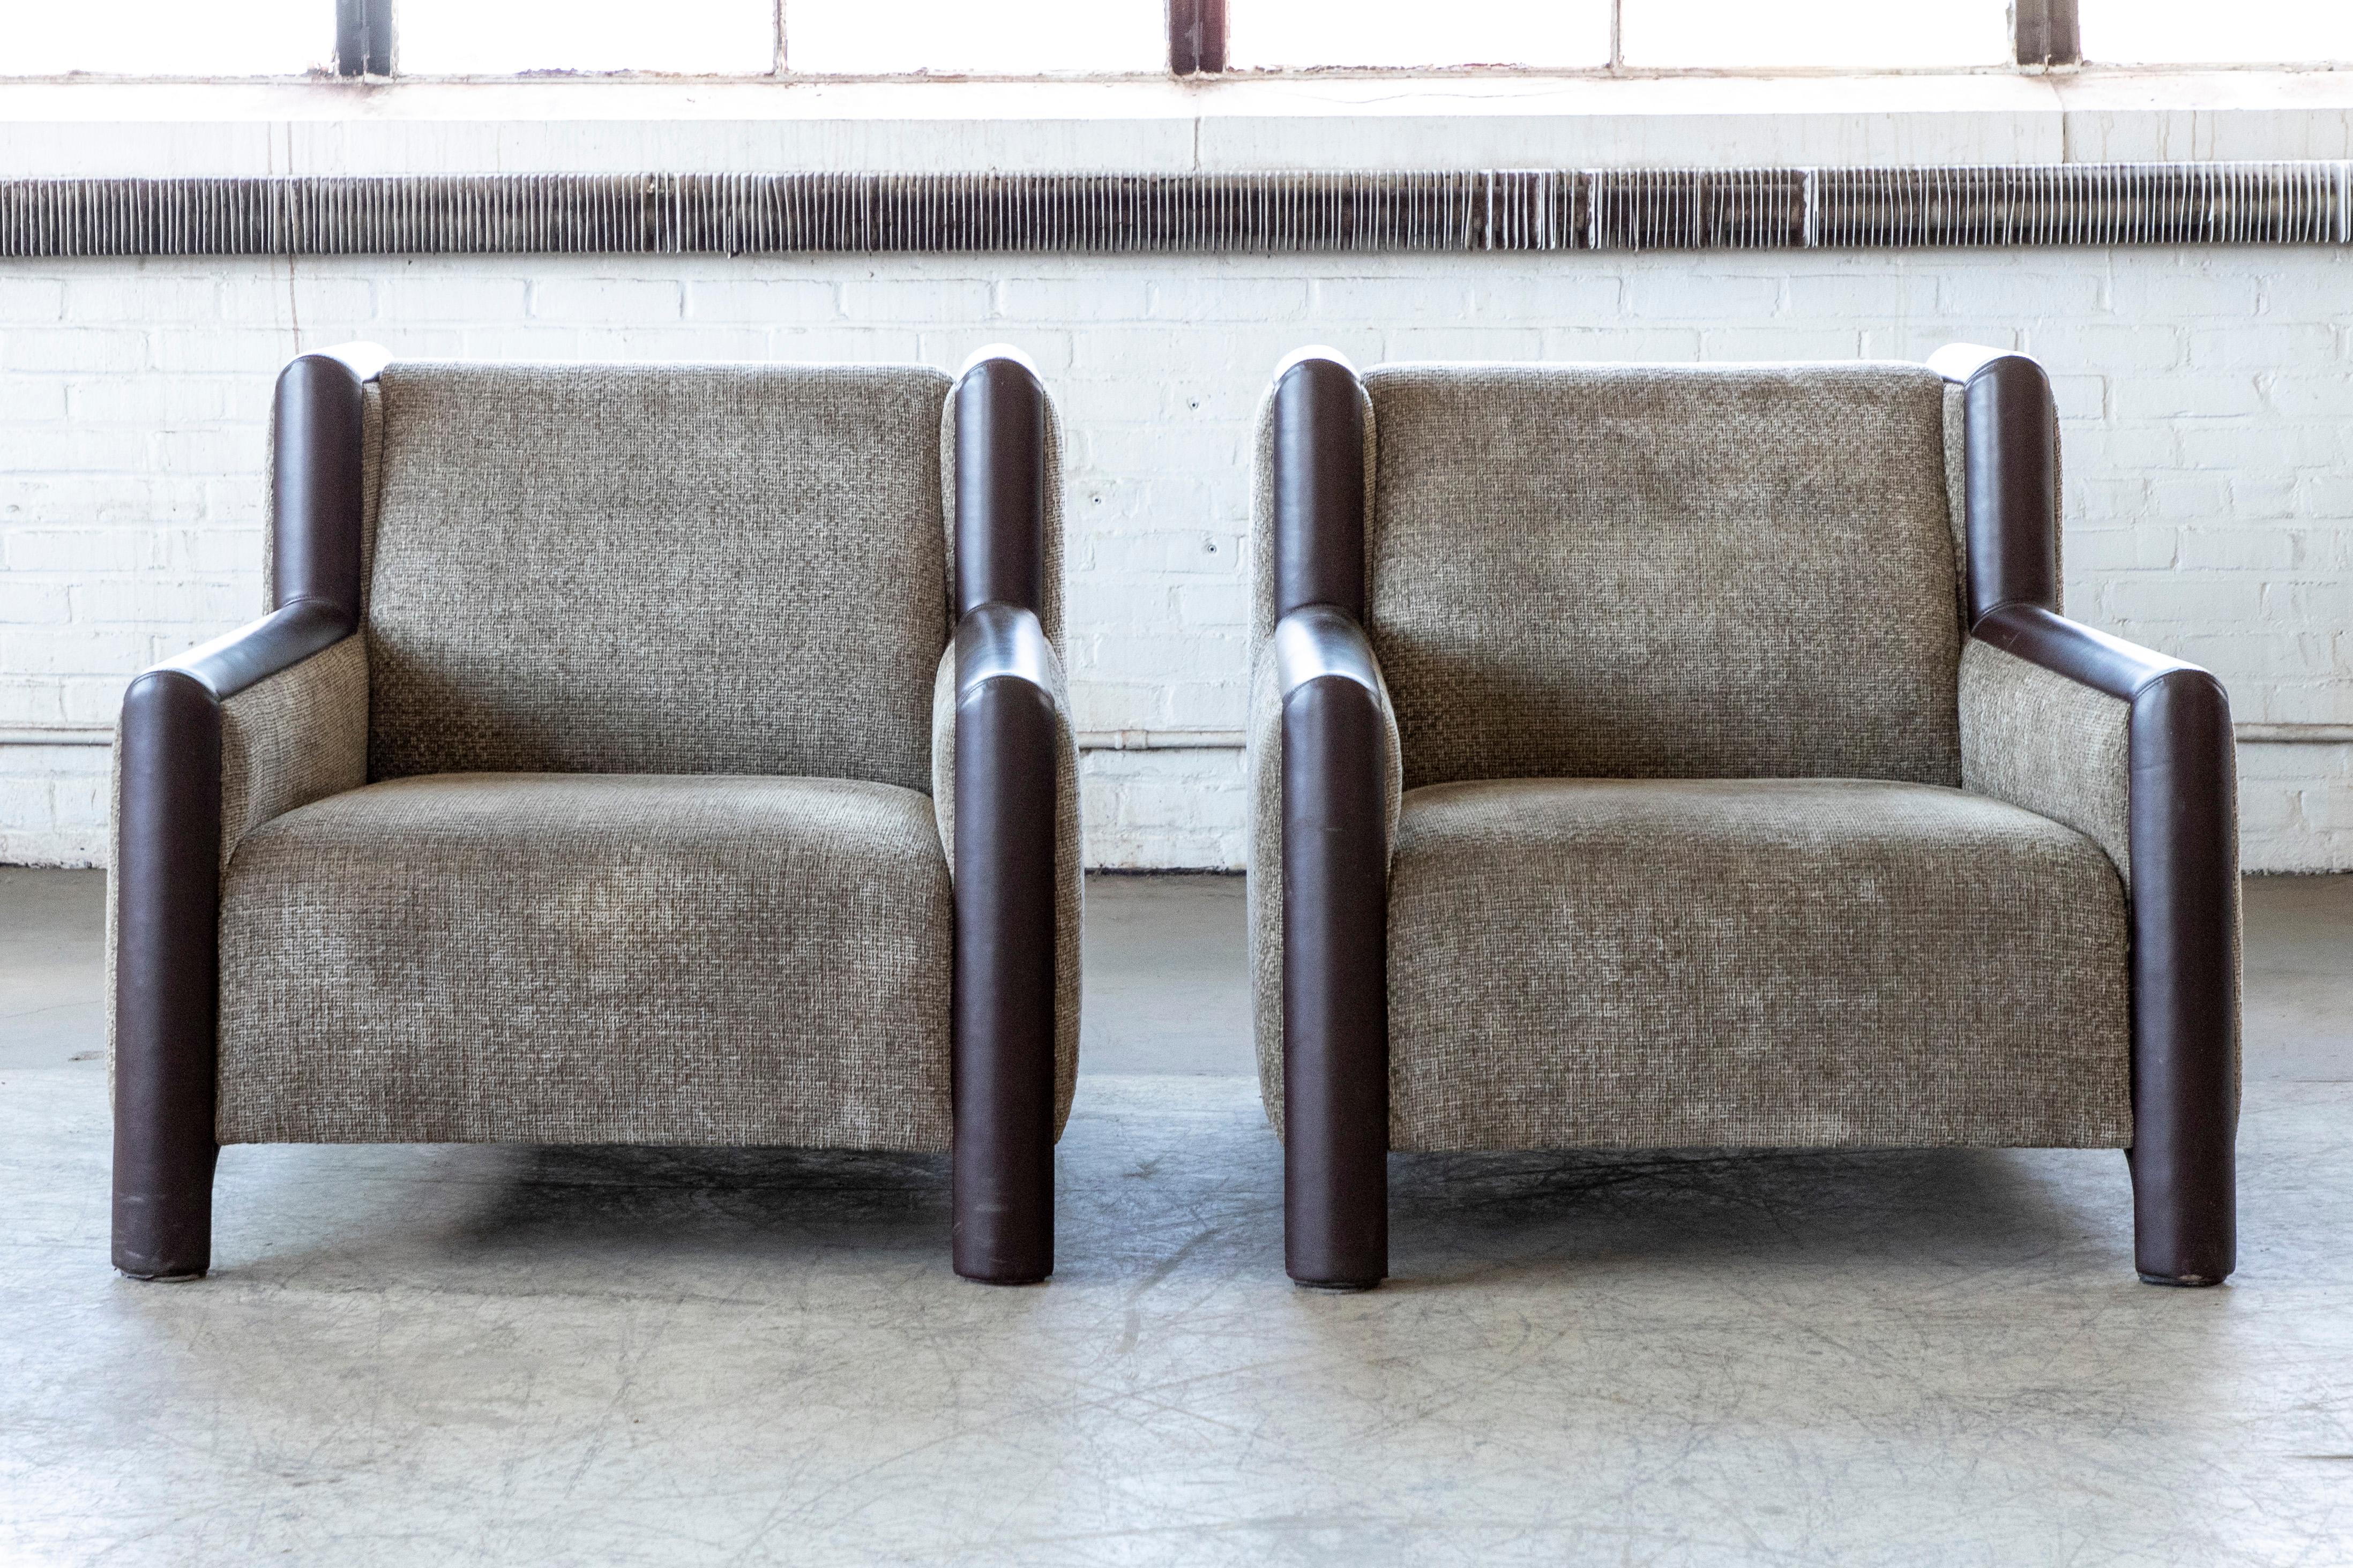 Late 20th Century Italian Club or Lounge Chairs in Leather and Wool 1980's by Romeo Sozzi